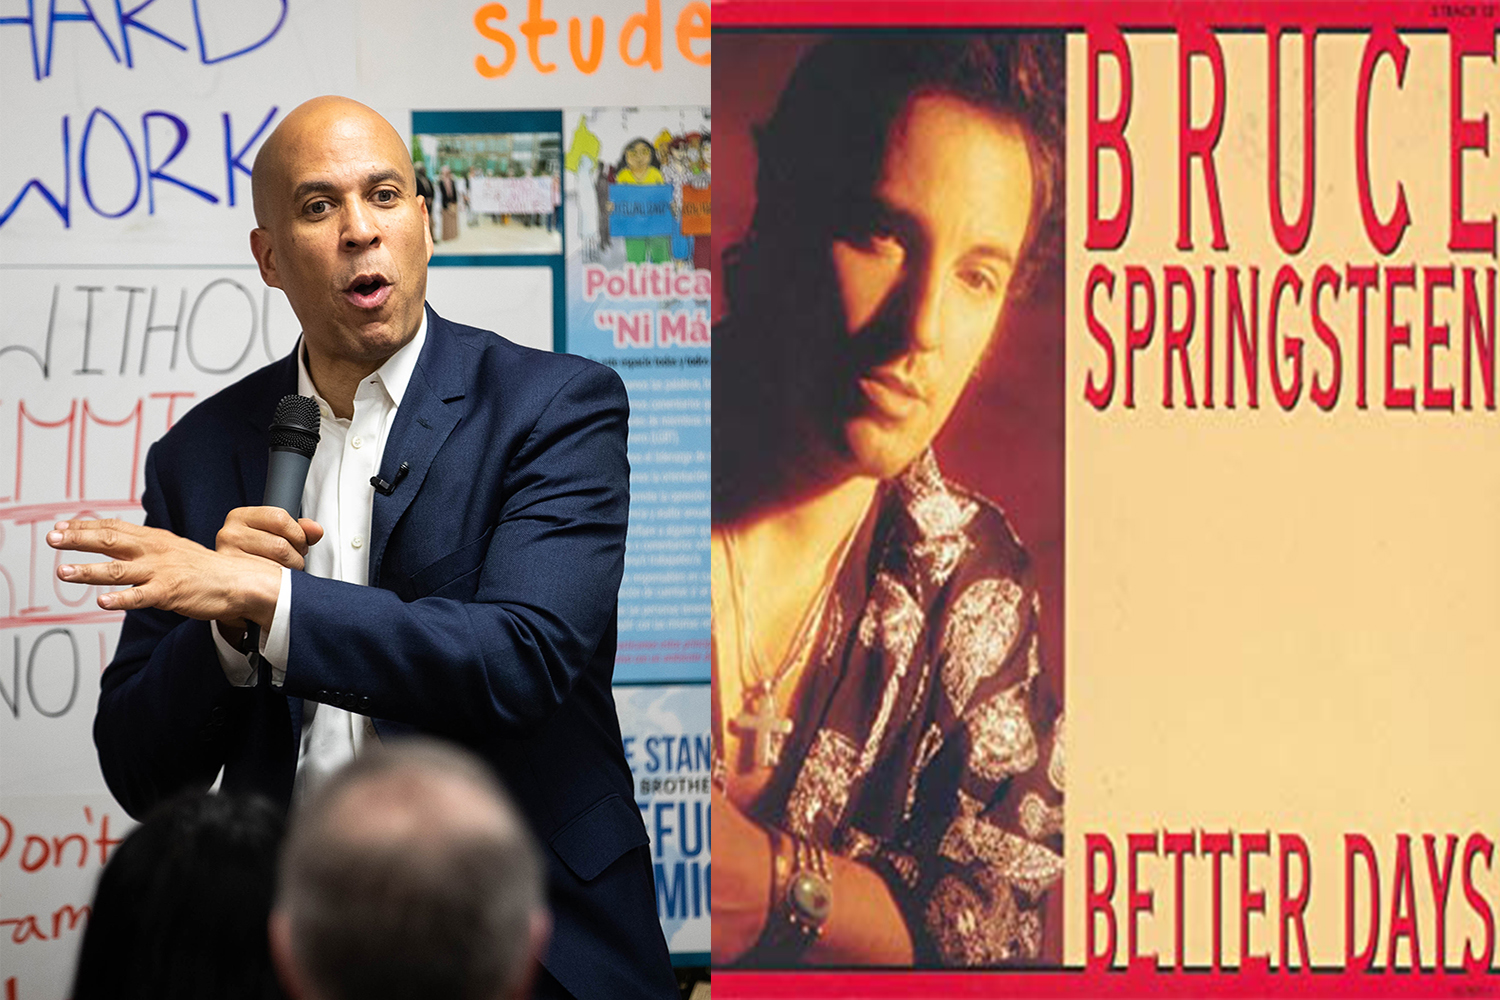 Cory Booker, Senator from New Jersey: “Better Days” by Bruce Springsteen